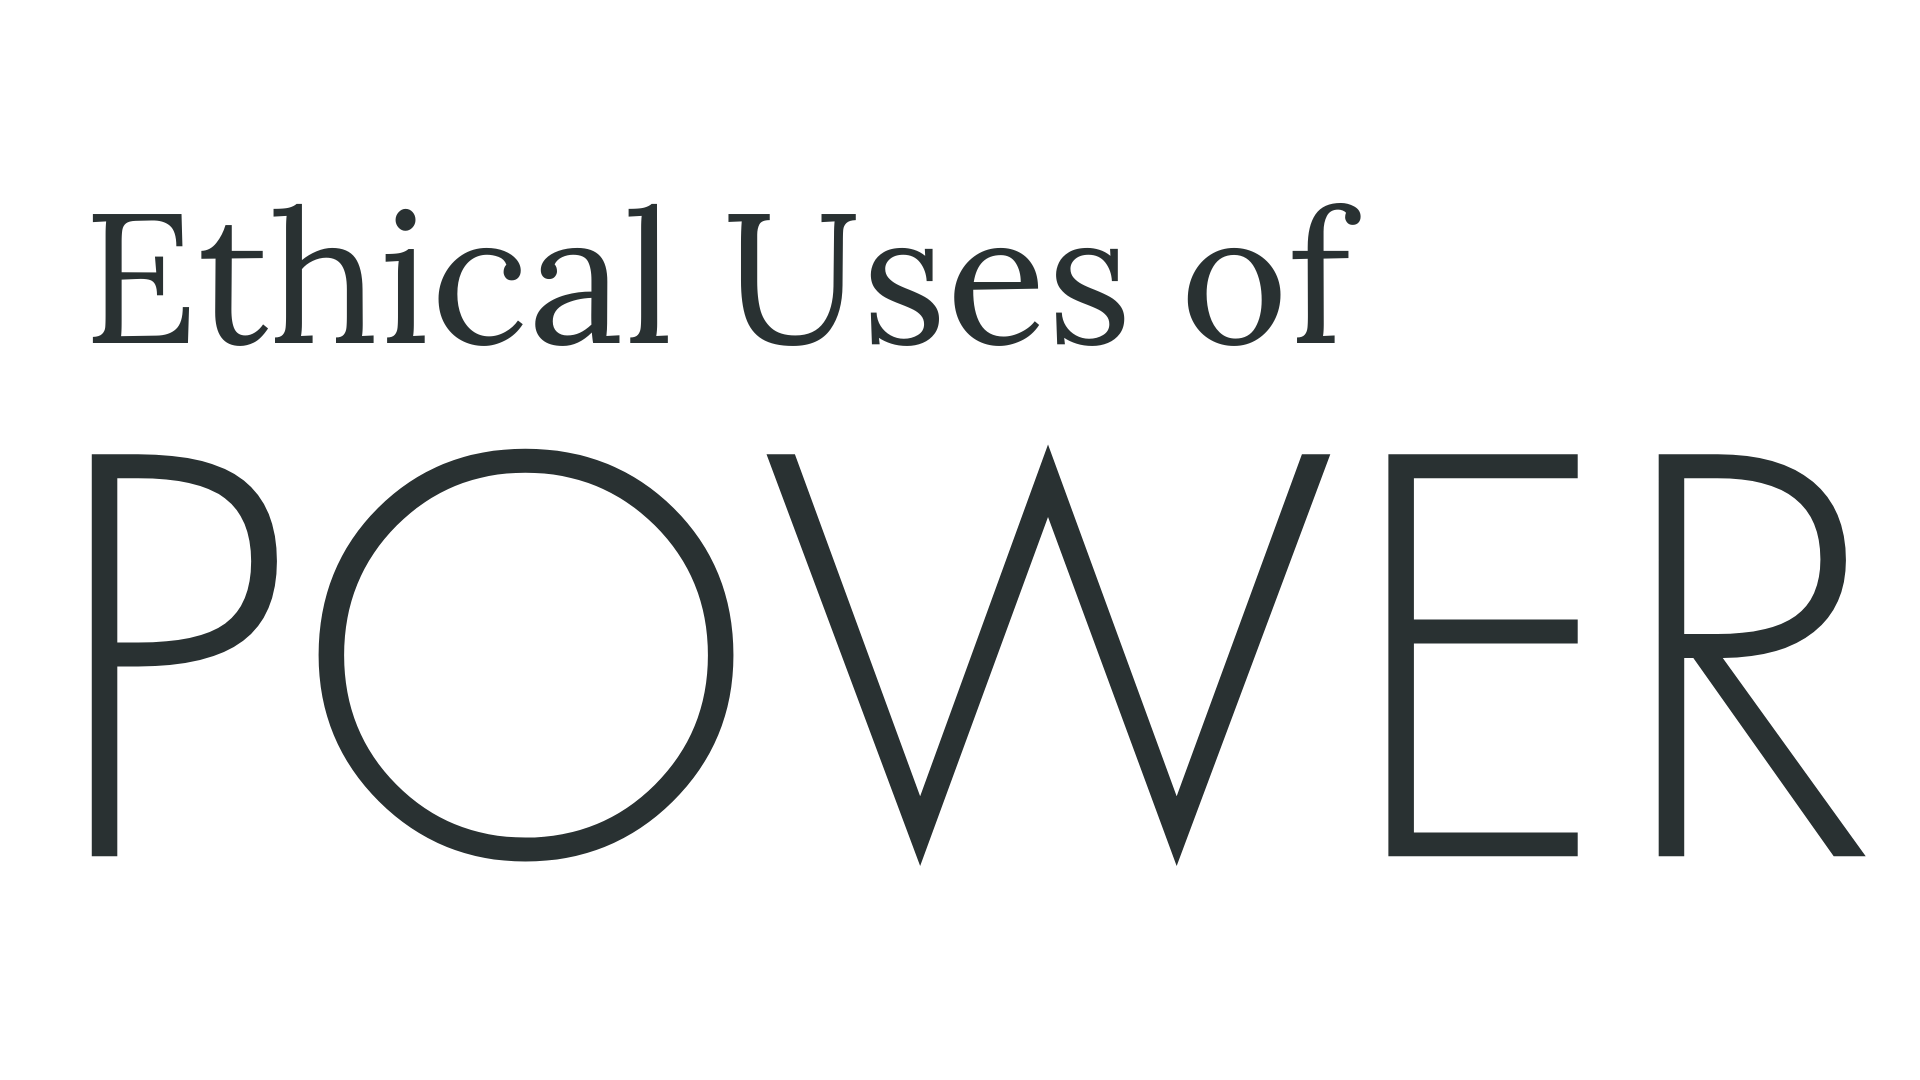 Ethical Uses of Power